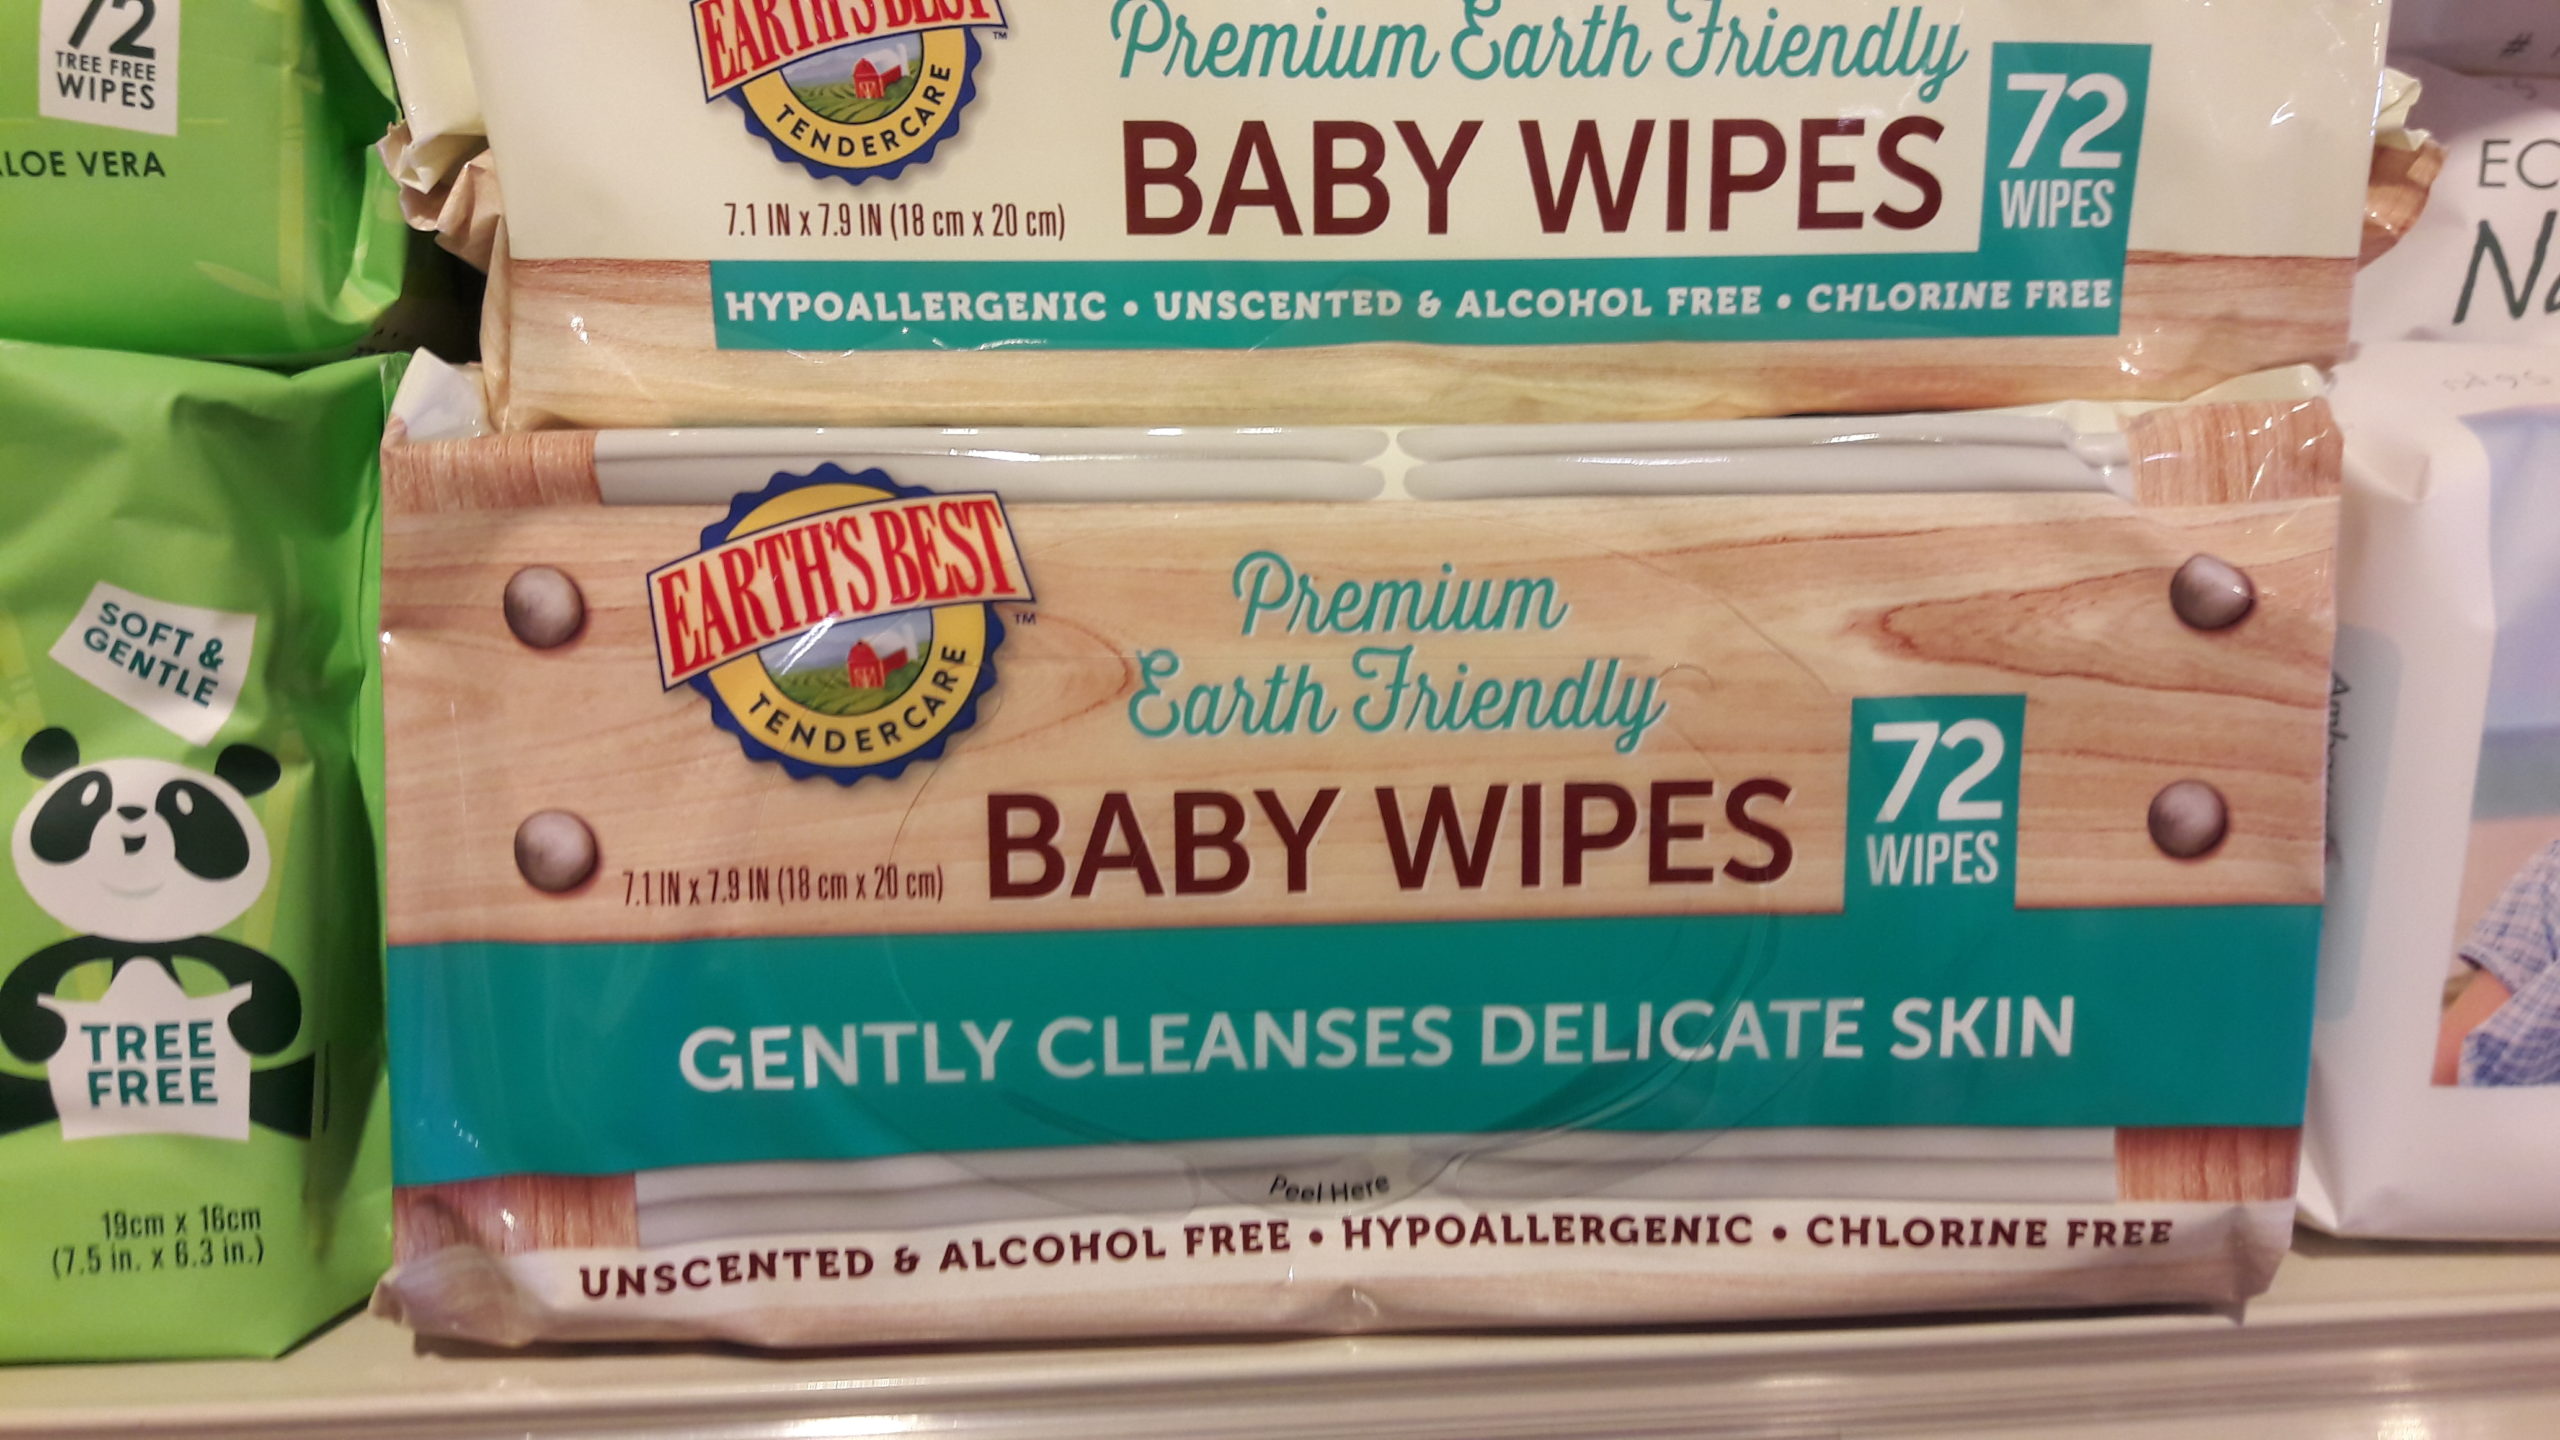 Biodegradable Earth Friendly Baby Wipes